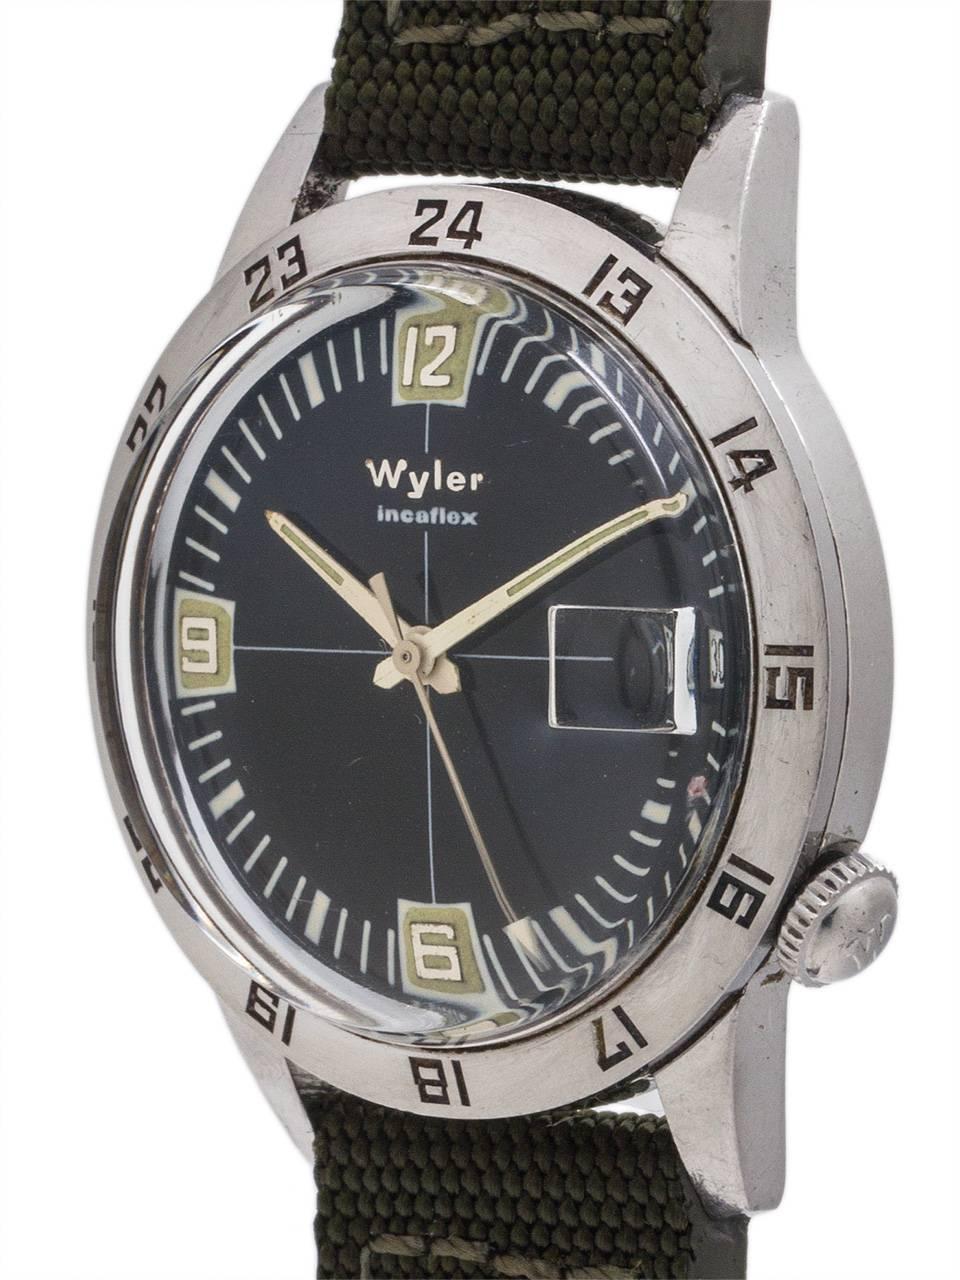 Great looking vintage Wyler Incaflex dual time zone diver’s model circa 1960’s. Featuring 35mm diameter 2 piece case (42mm lugs end to end), outside rotating bezel with 24 hour indications, acrylic crystal, and beautiful original glossy black dial